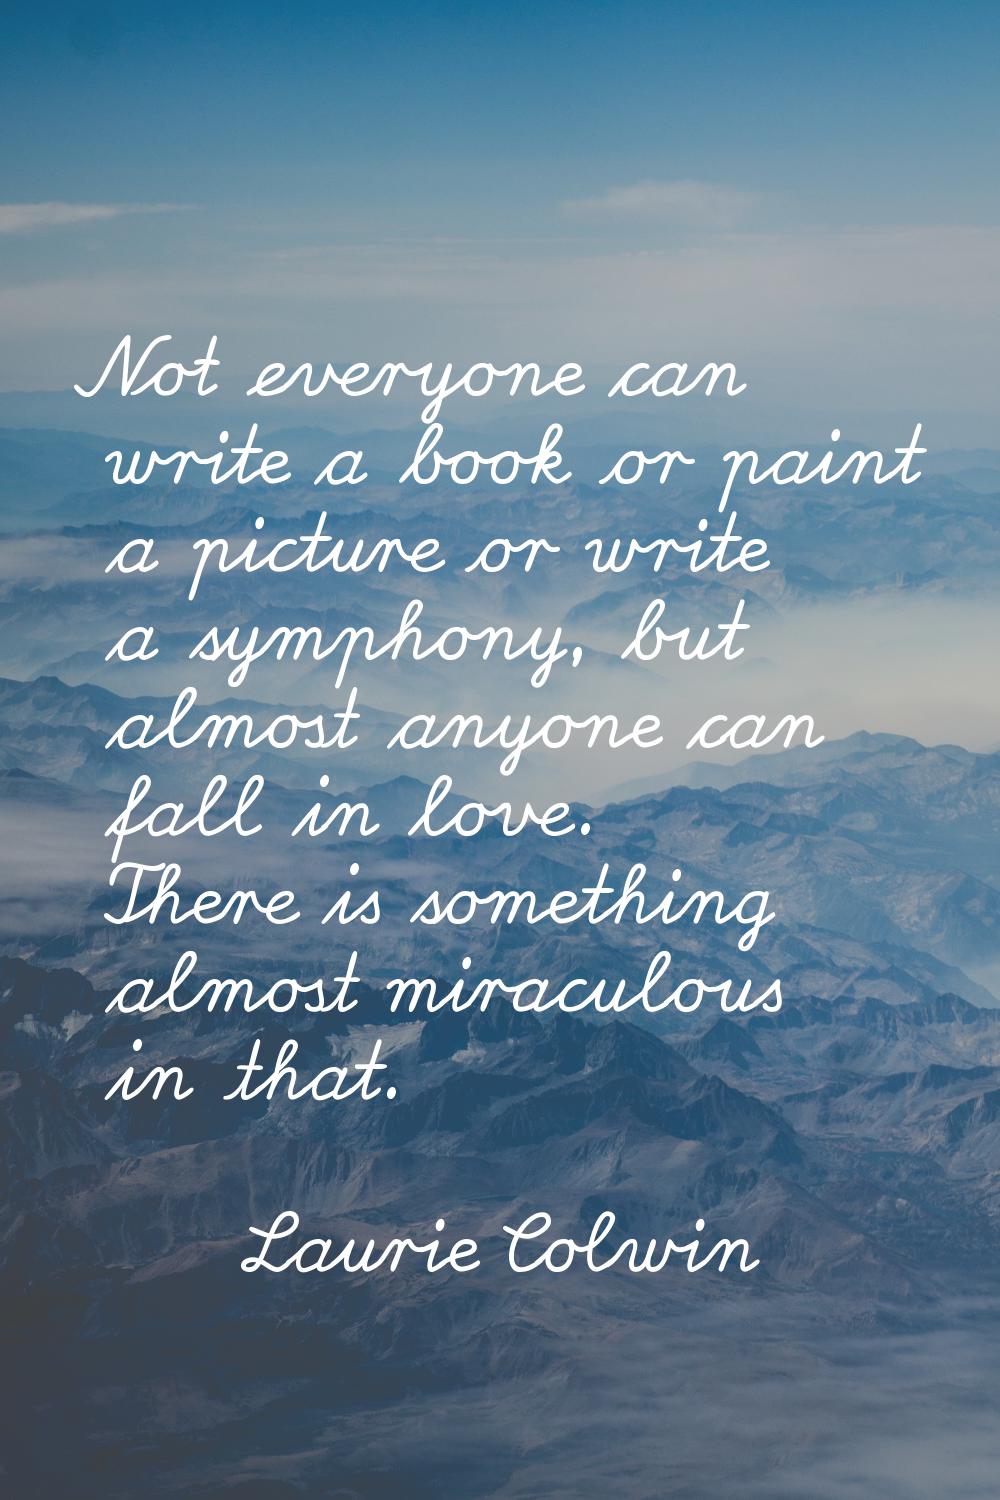 Not everyone can write a book or paint a picture or write a symphony, but almost anyone can fall in